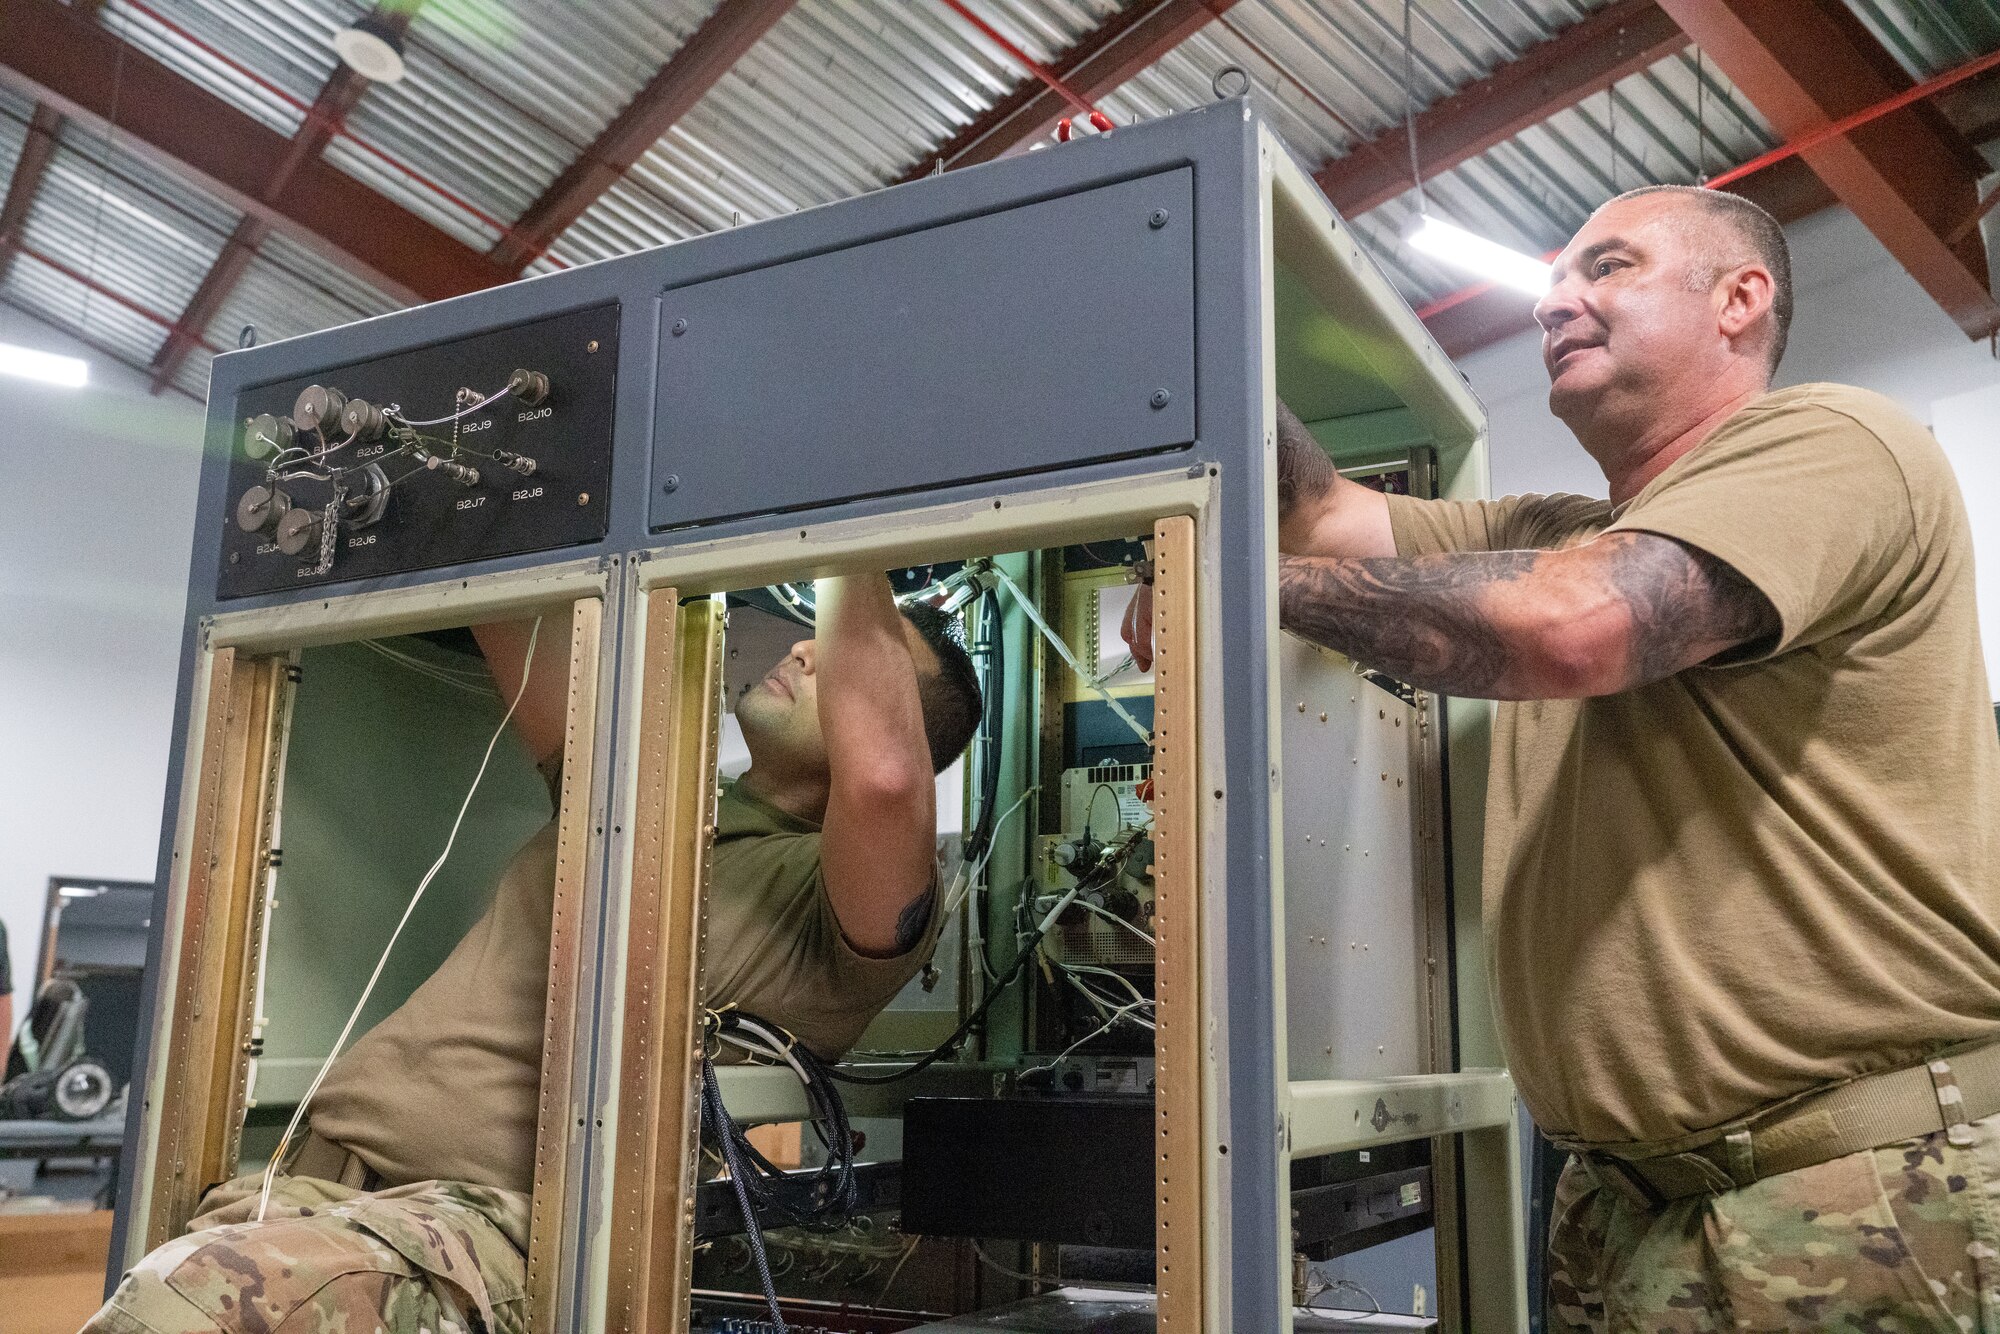 Senior Airman Warren Reynier and Master Sgt. Alexander Mitchell, 403rd Maintenance Squadron meteorology technicians, work on the internal wiring of the aerial reconnaissance weather officer station at Keesler Air Force Base, Miss., May 12, 2021. The 53rd Weather Reconnaissance Squadron “Hurricane Hunters’” ARWO and loadmaster/dropsonde operator stations are being upgraded with hardware and software to increase their weather collecting capabilities. (U.S. Air Force photo by 2nd Lt. Christopher Carranza)